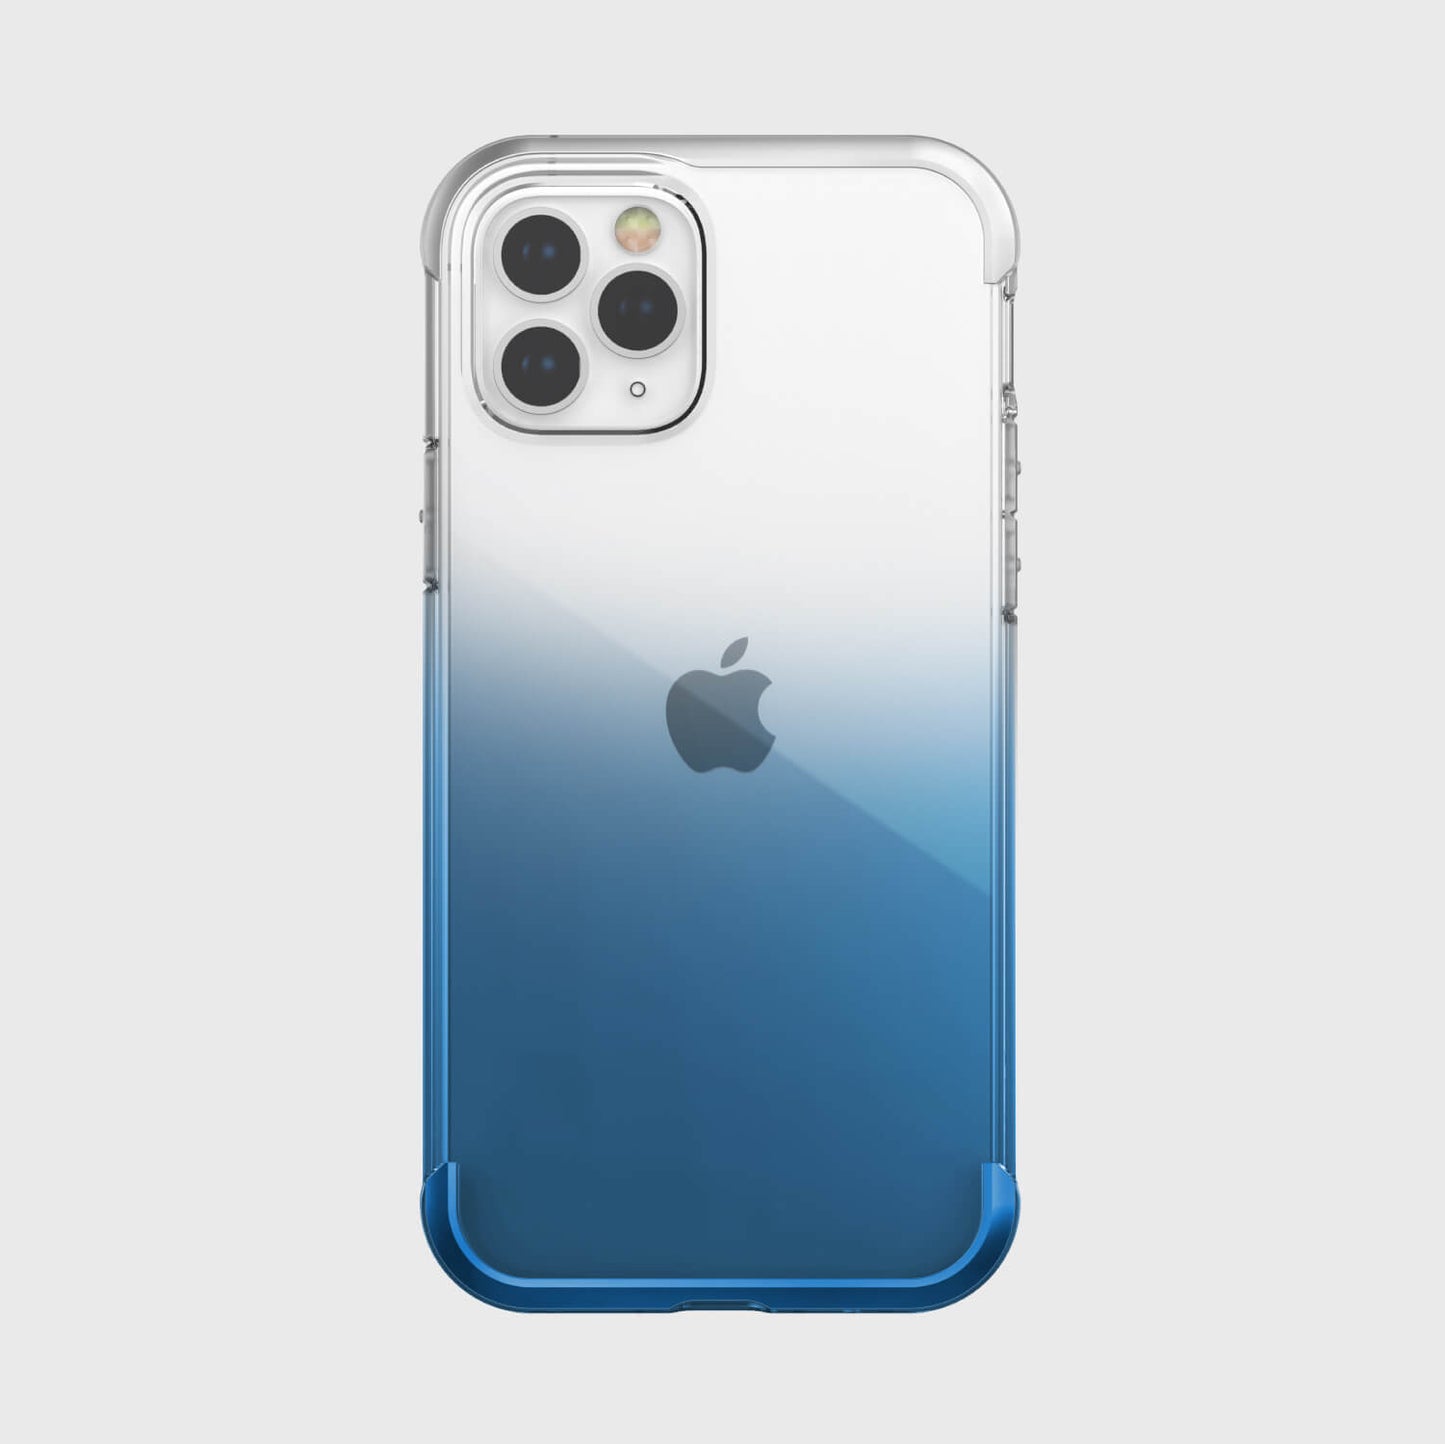 A blue and white Raptic Air iPhone 12 Pro Max case with 4-metre drop protection and wireless charging compatibility.